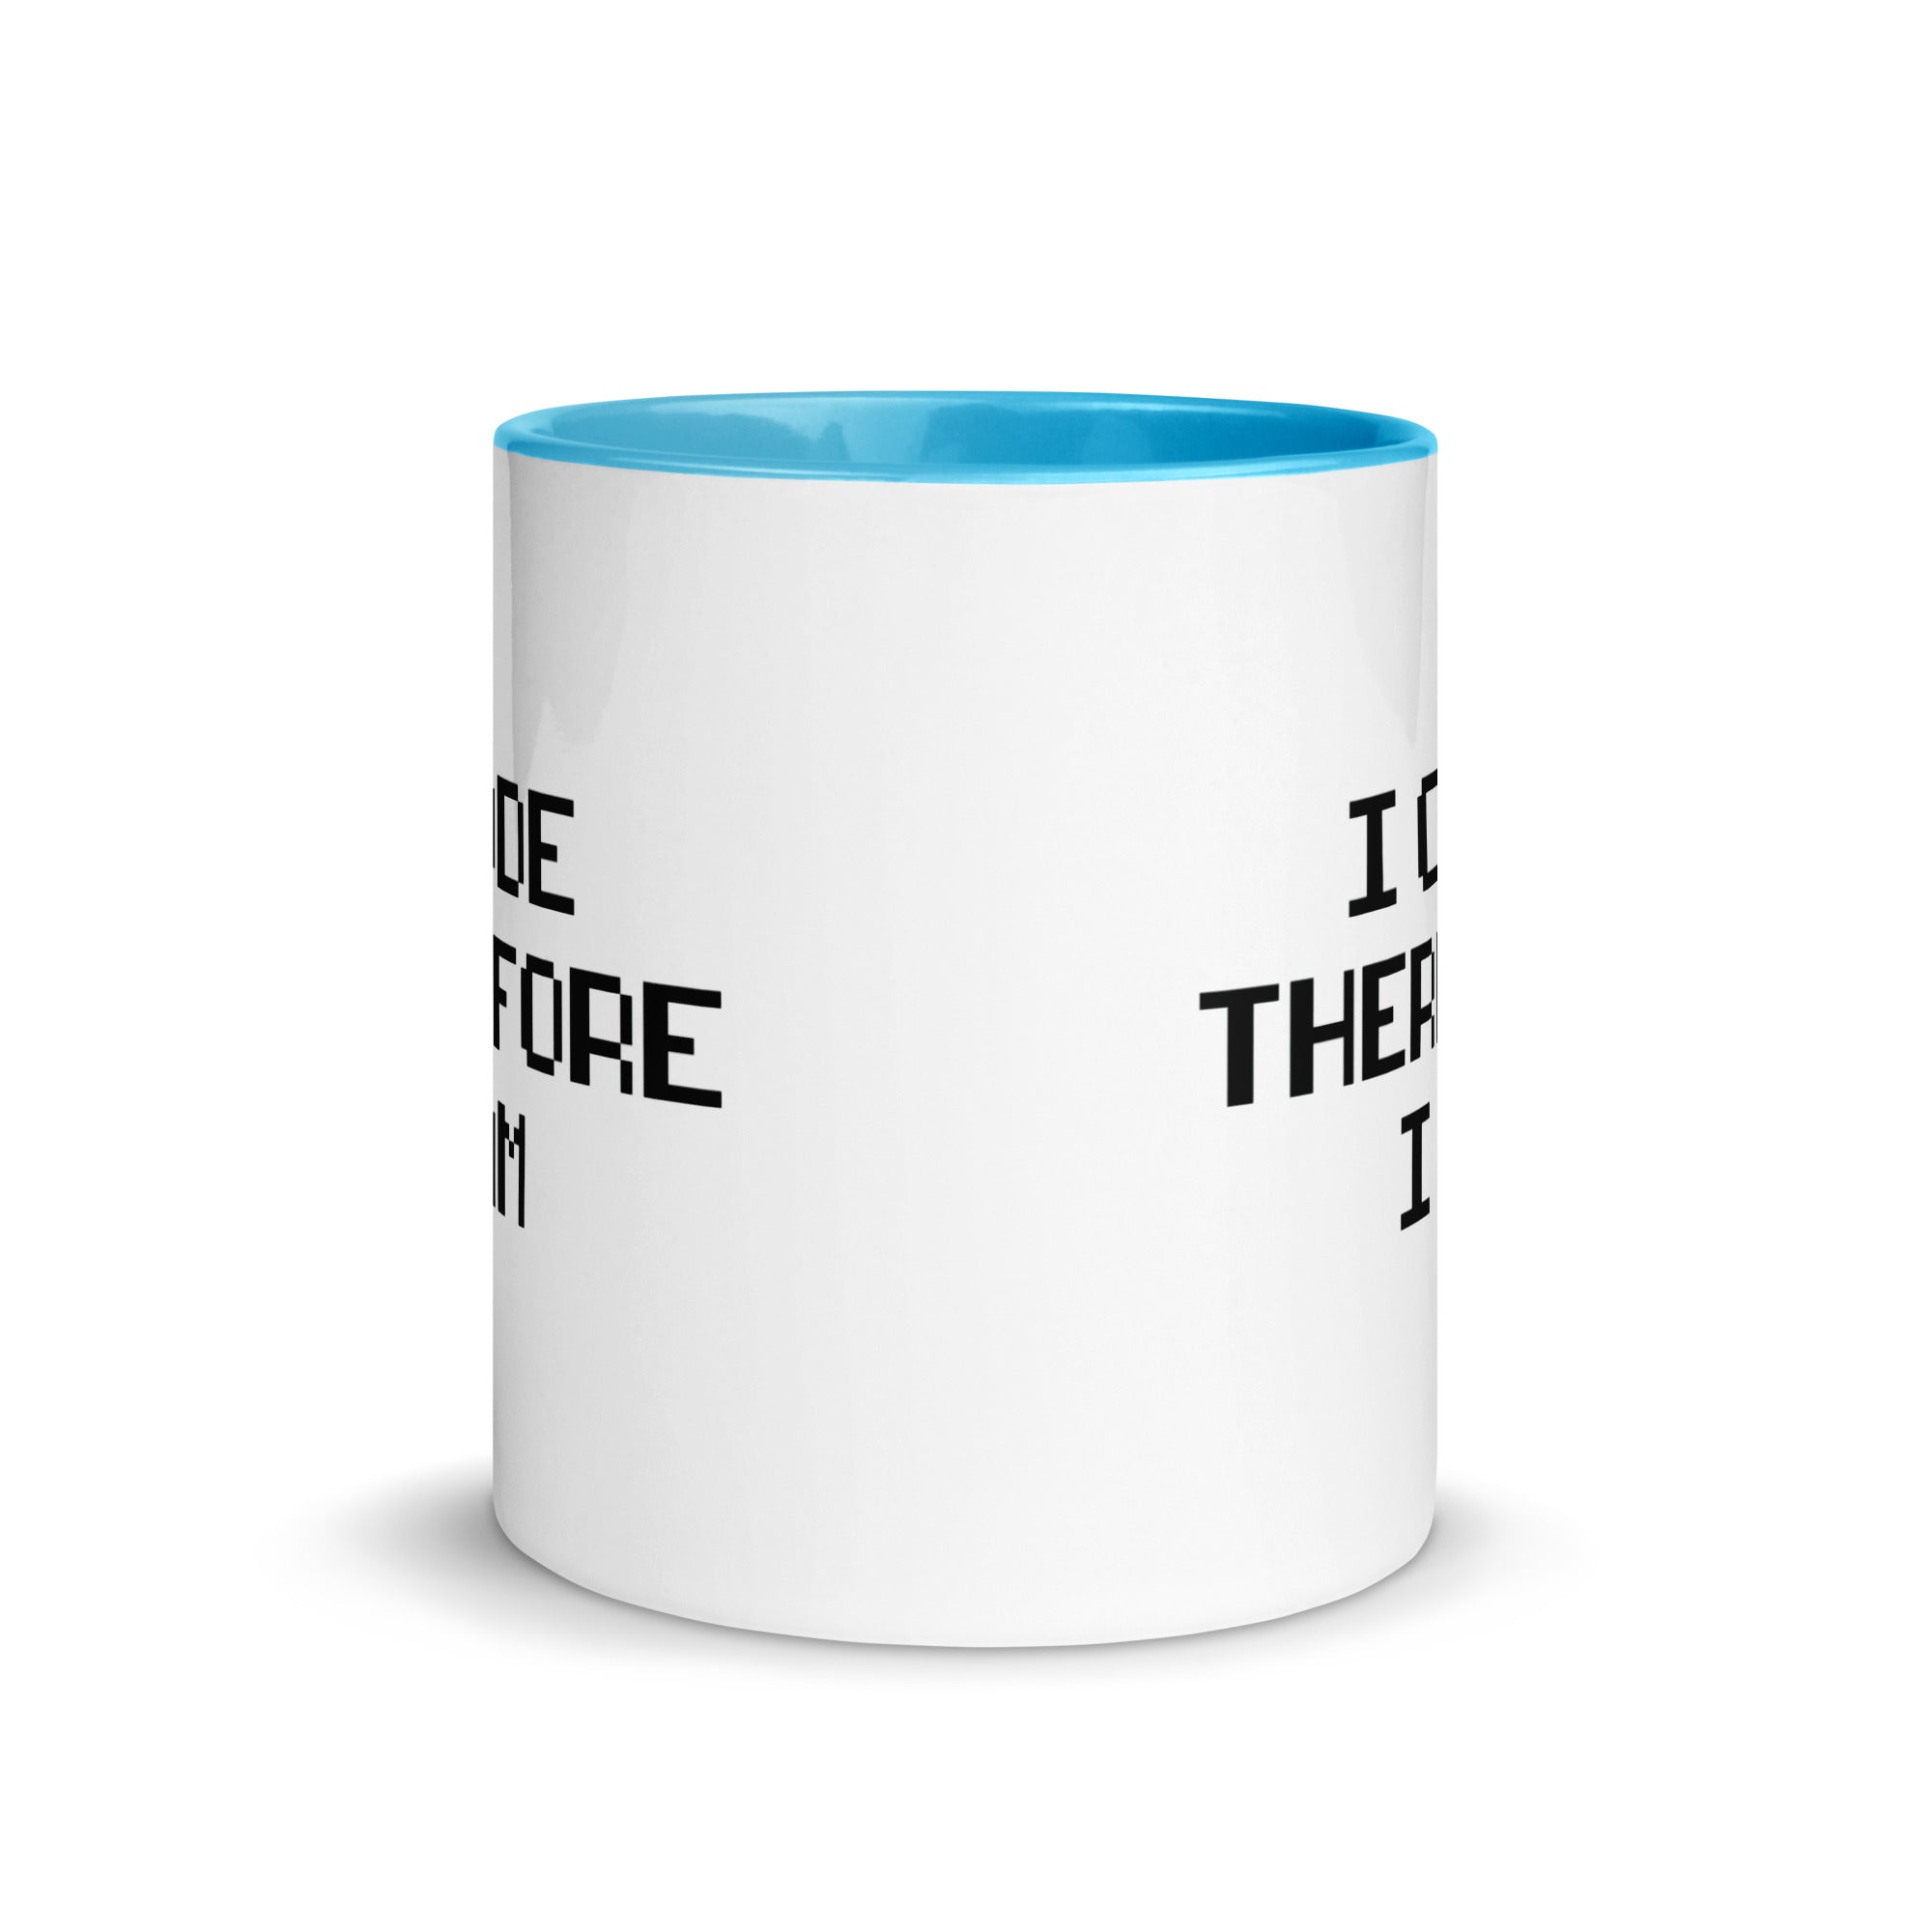 Mug with Color Inside | I Code Therefore I Am